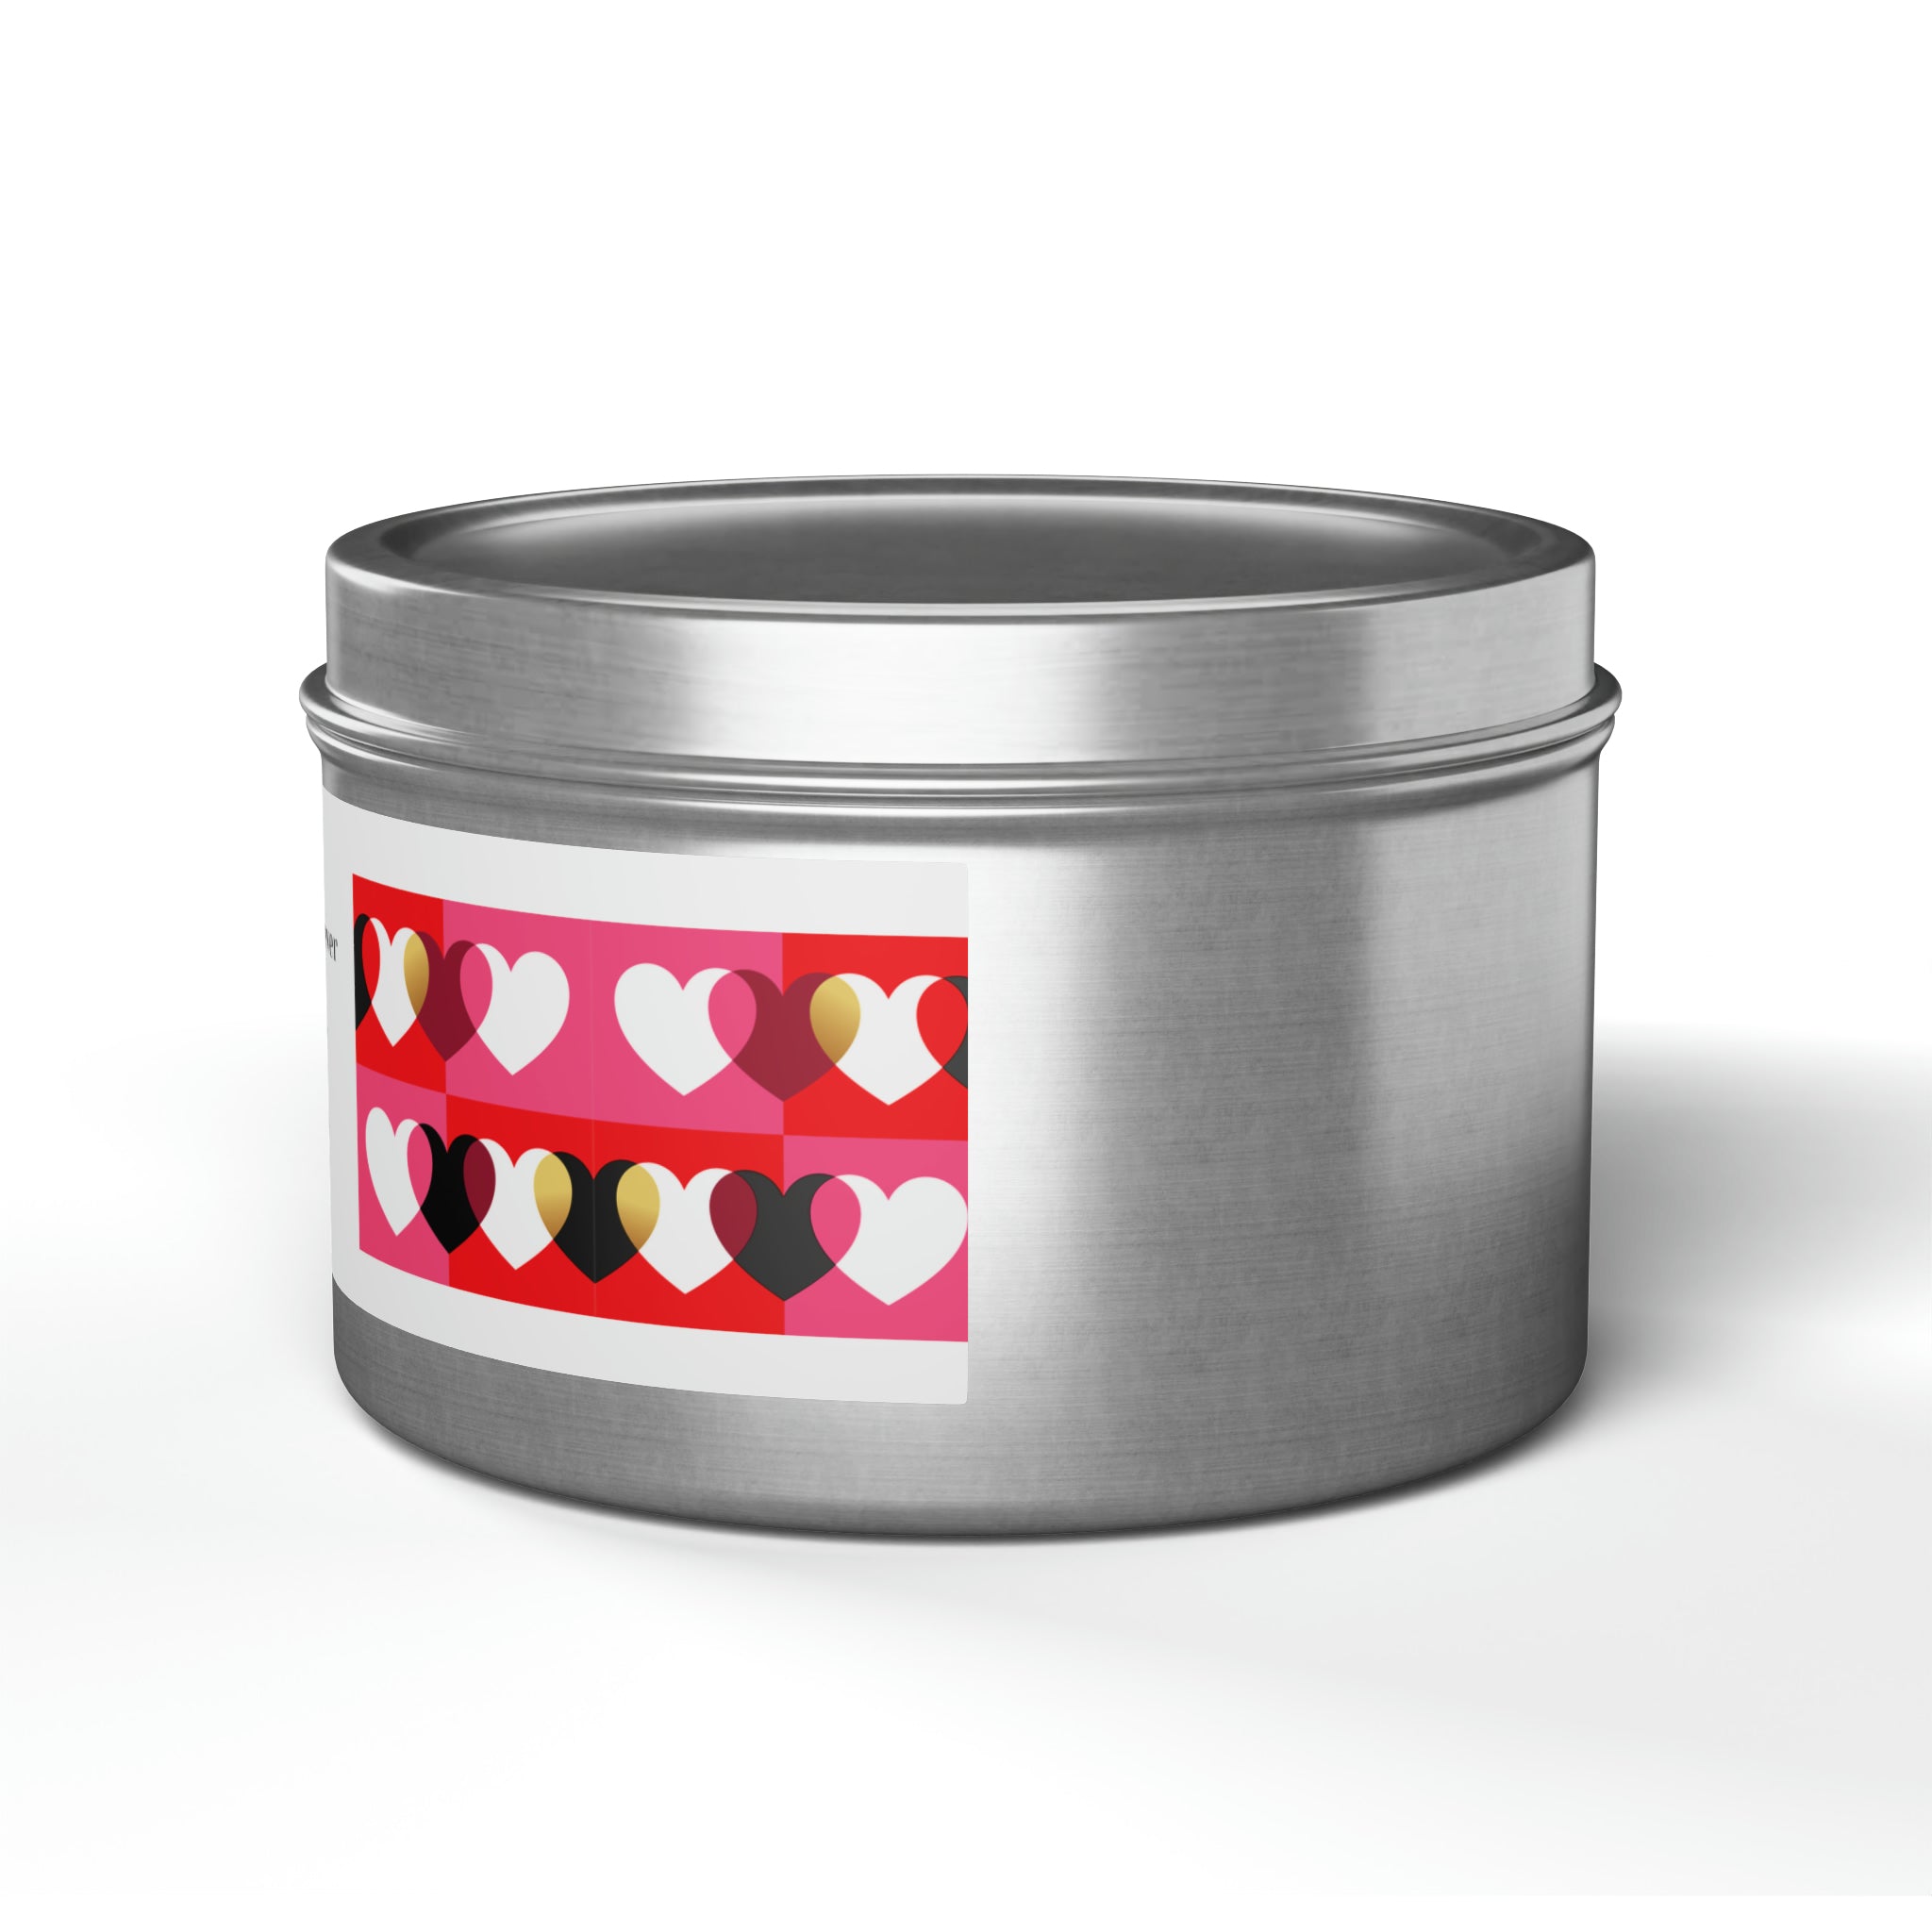 Vanilla Bean Always & Forever Soy base candle love, valentine's day gift Tin Candles-100